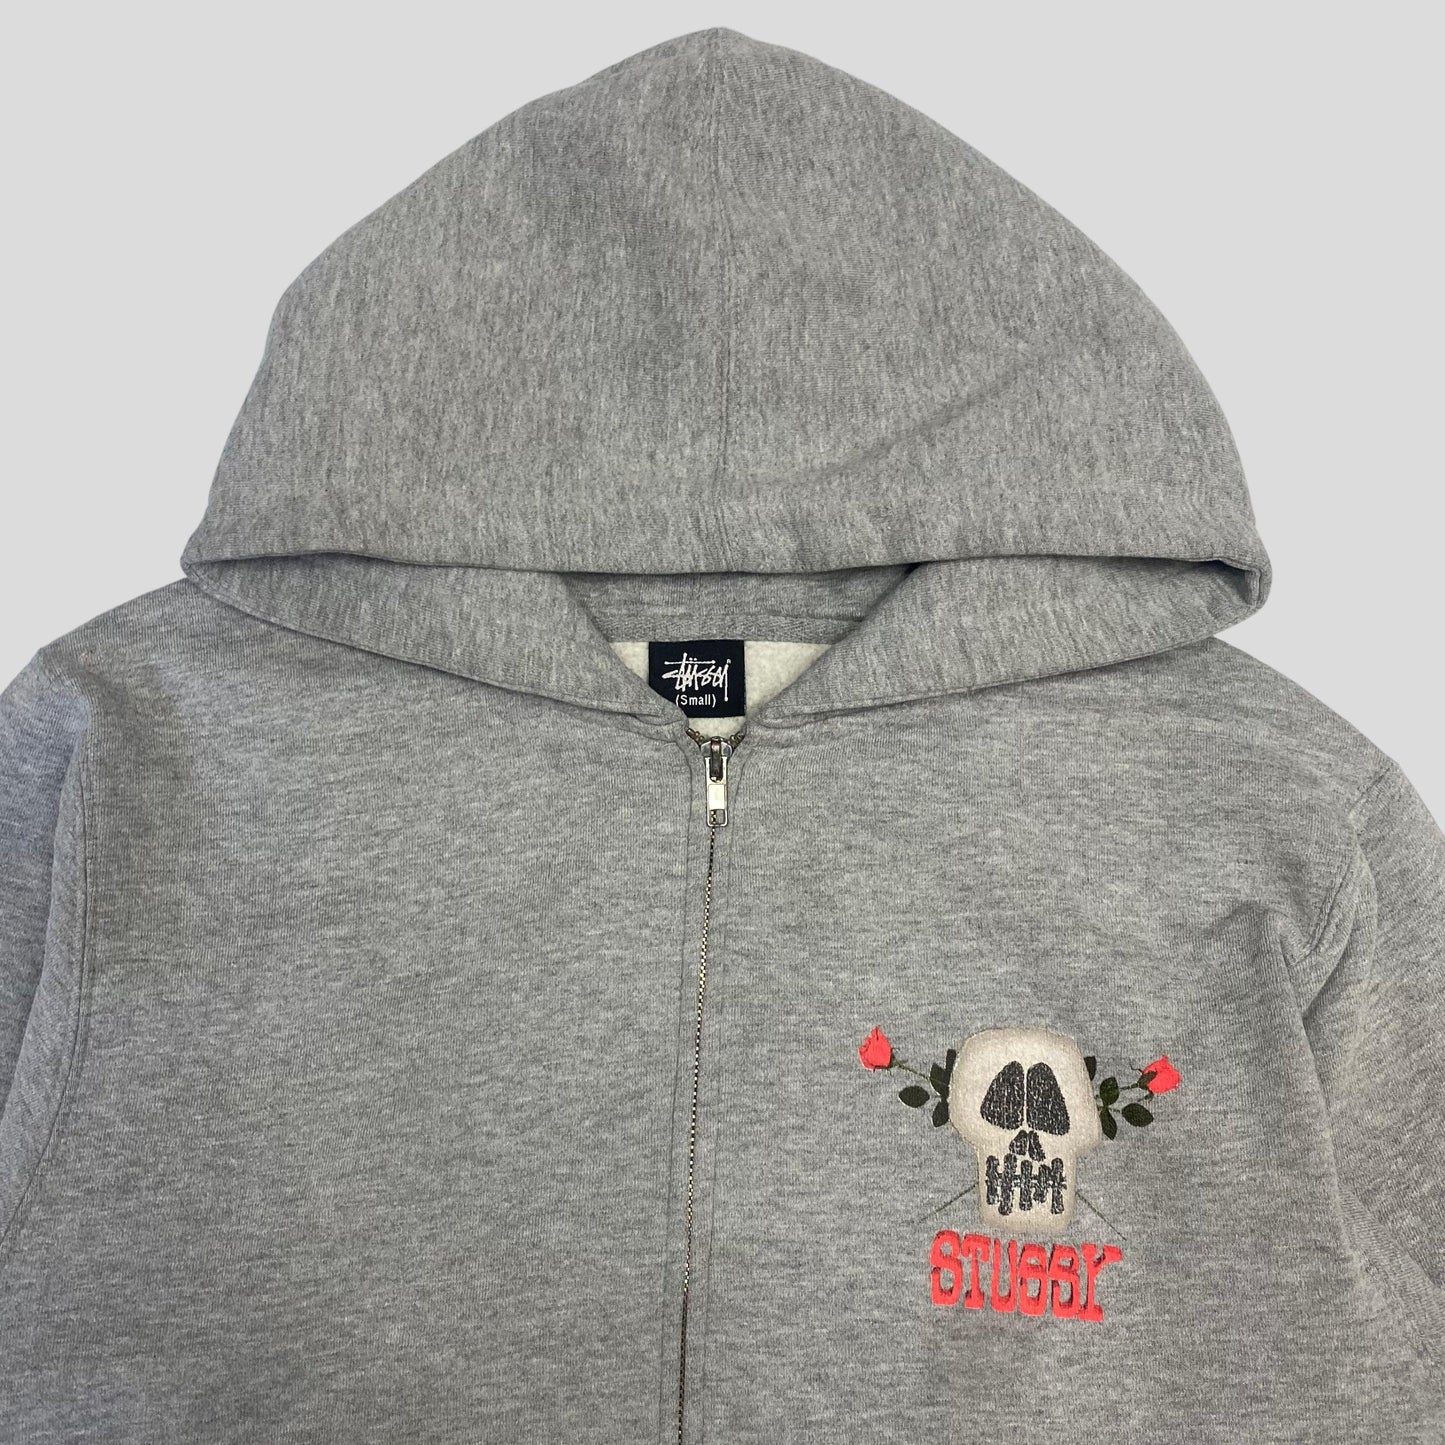 Stussy early 00’s Skull & Roses Zip-up Hoodie - S - Known Source